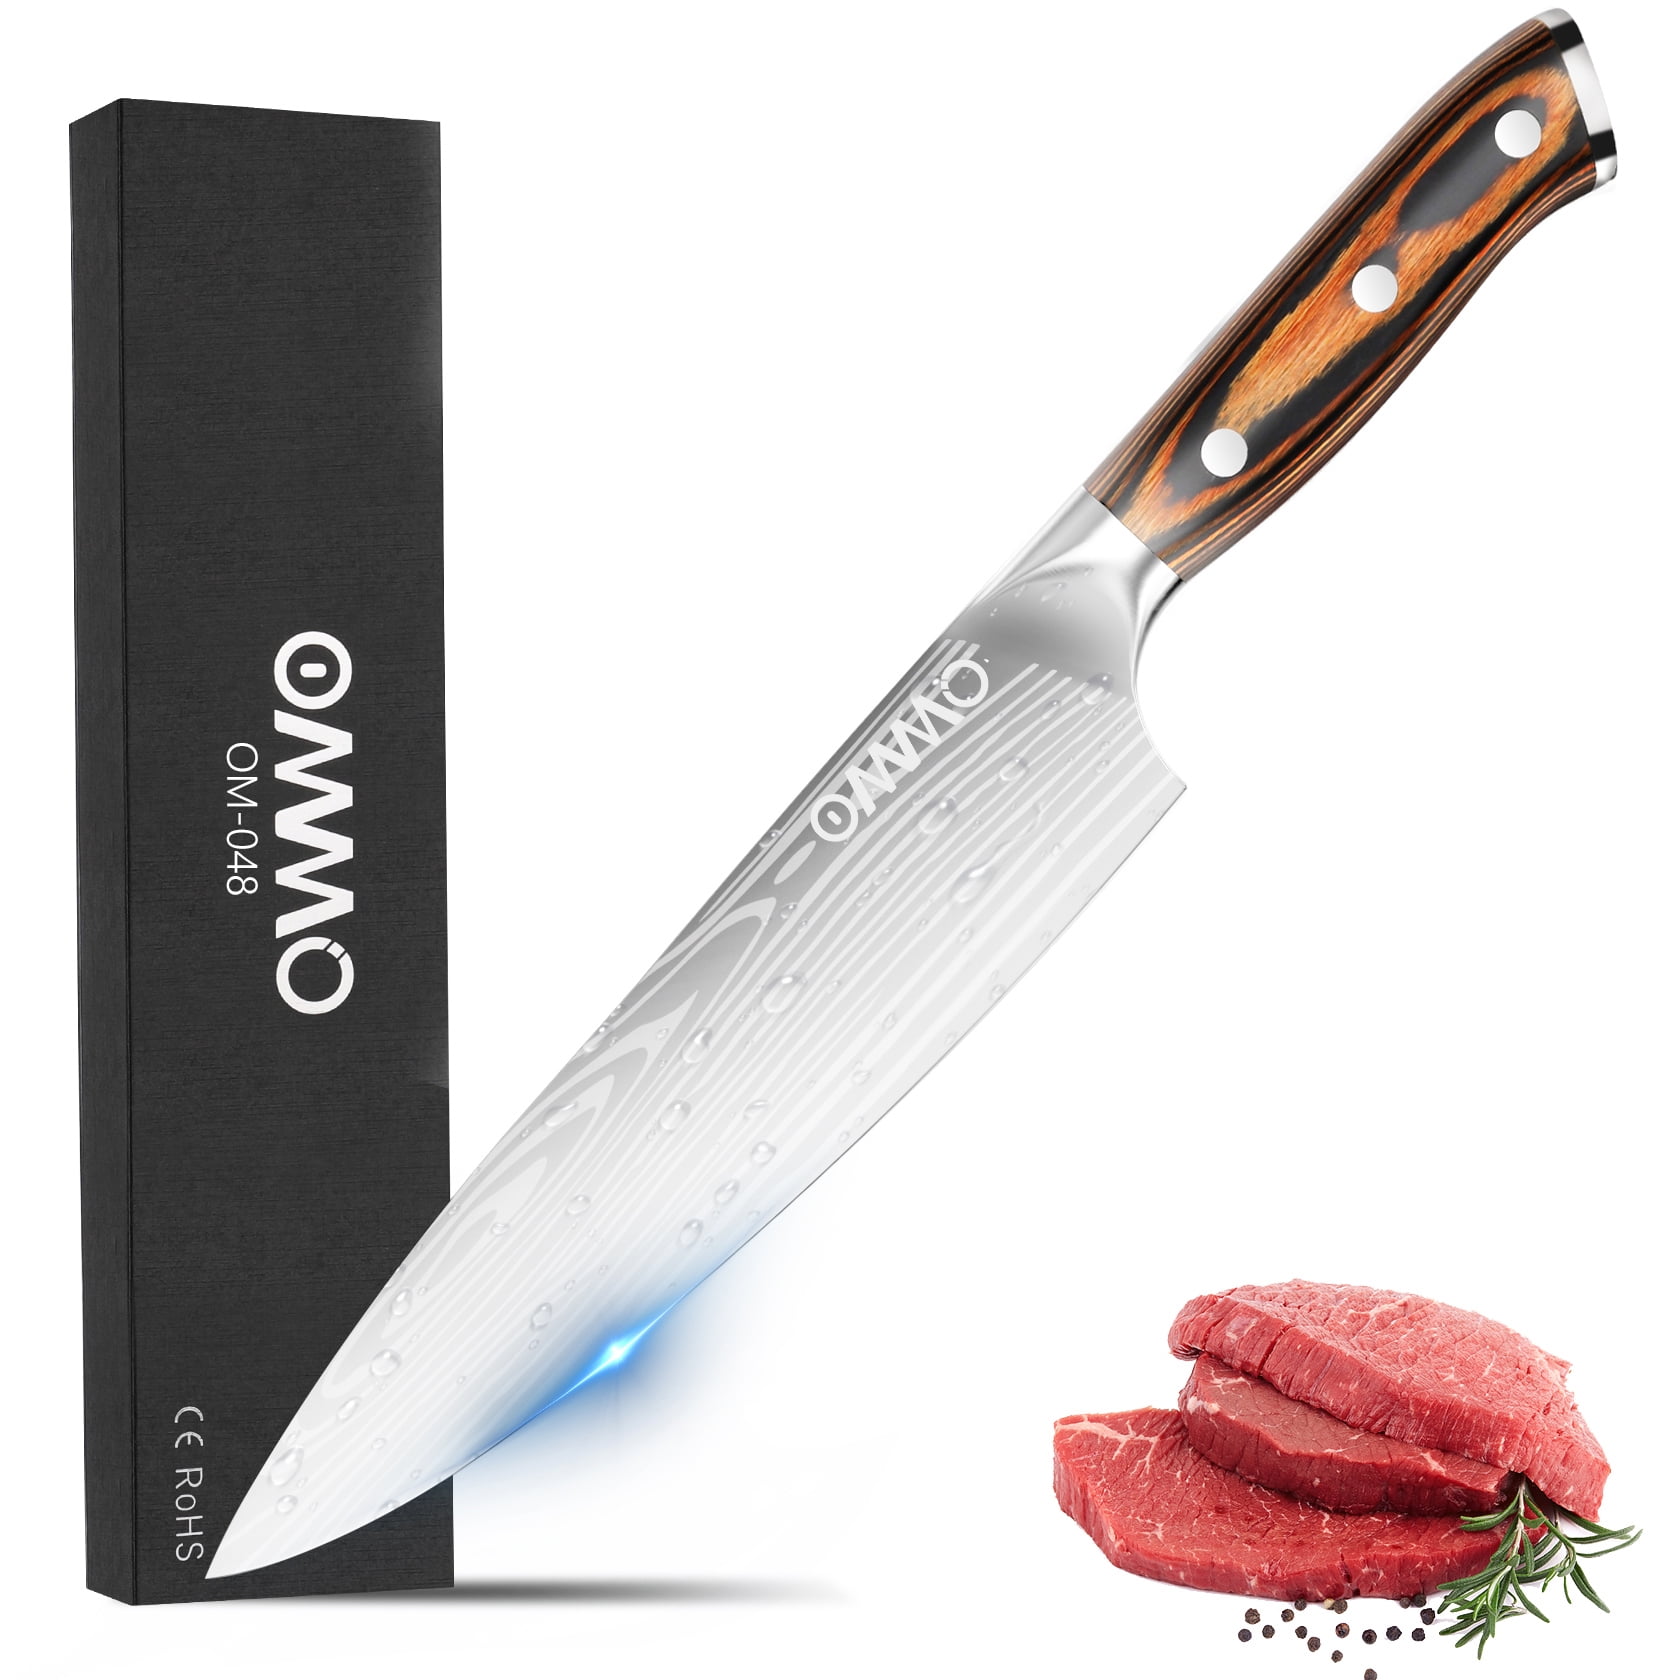 OMMO Chef Knife, 8 Inch High Carbon Stainless Steel Ultra Sharp  Professional Kitchen Knife with Ergonomic Handle, Included Sheath and Box 